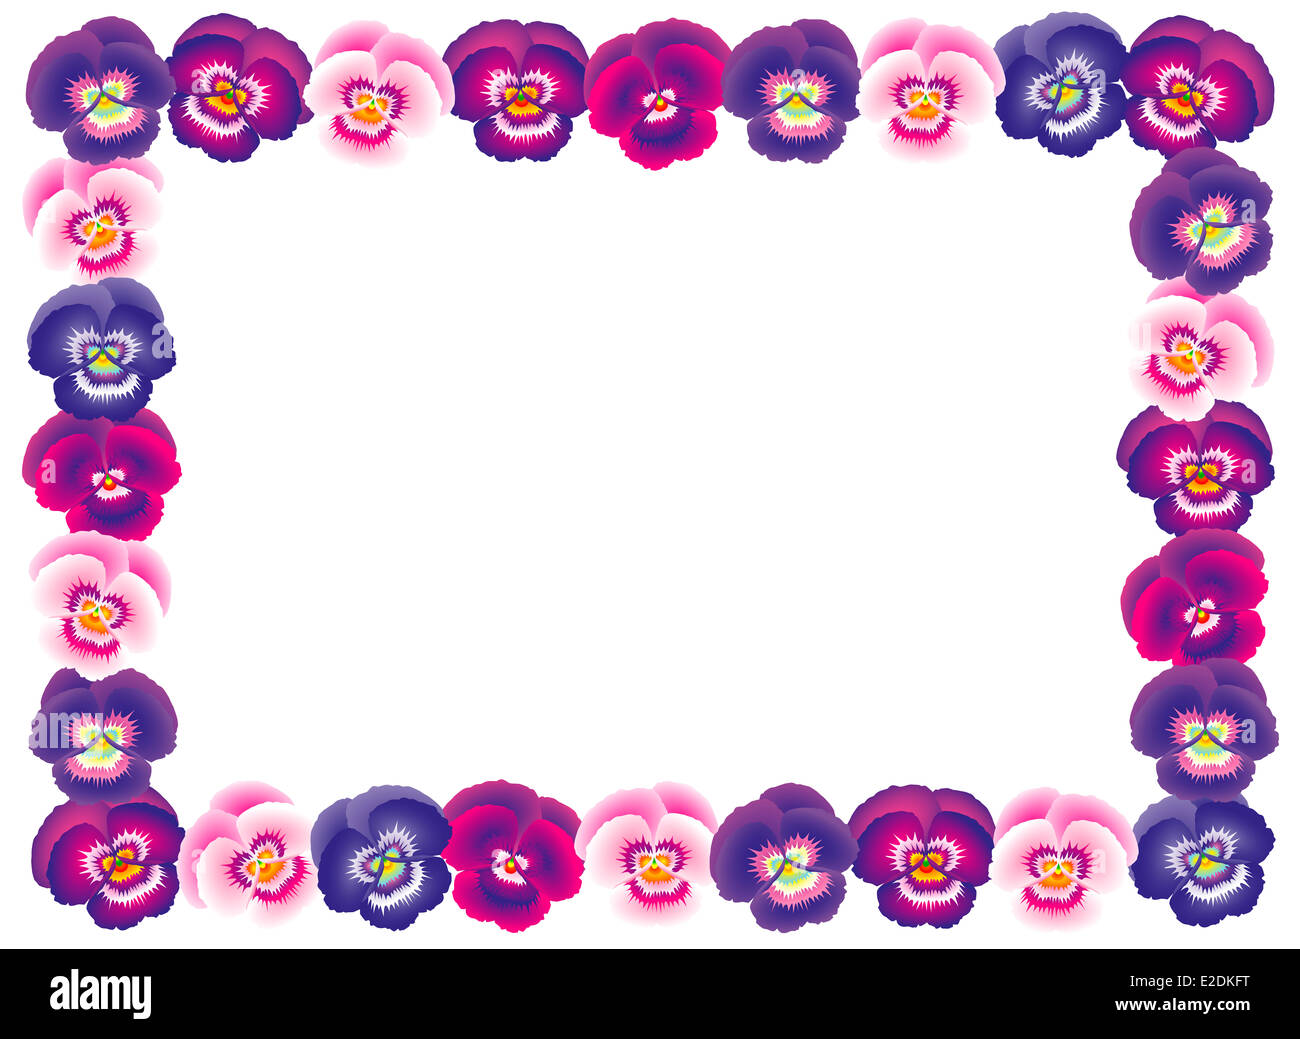 Pansy rose horizontal frame. Banque D'Images